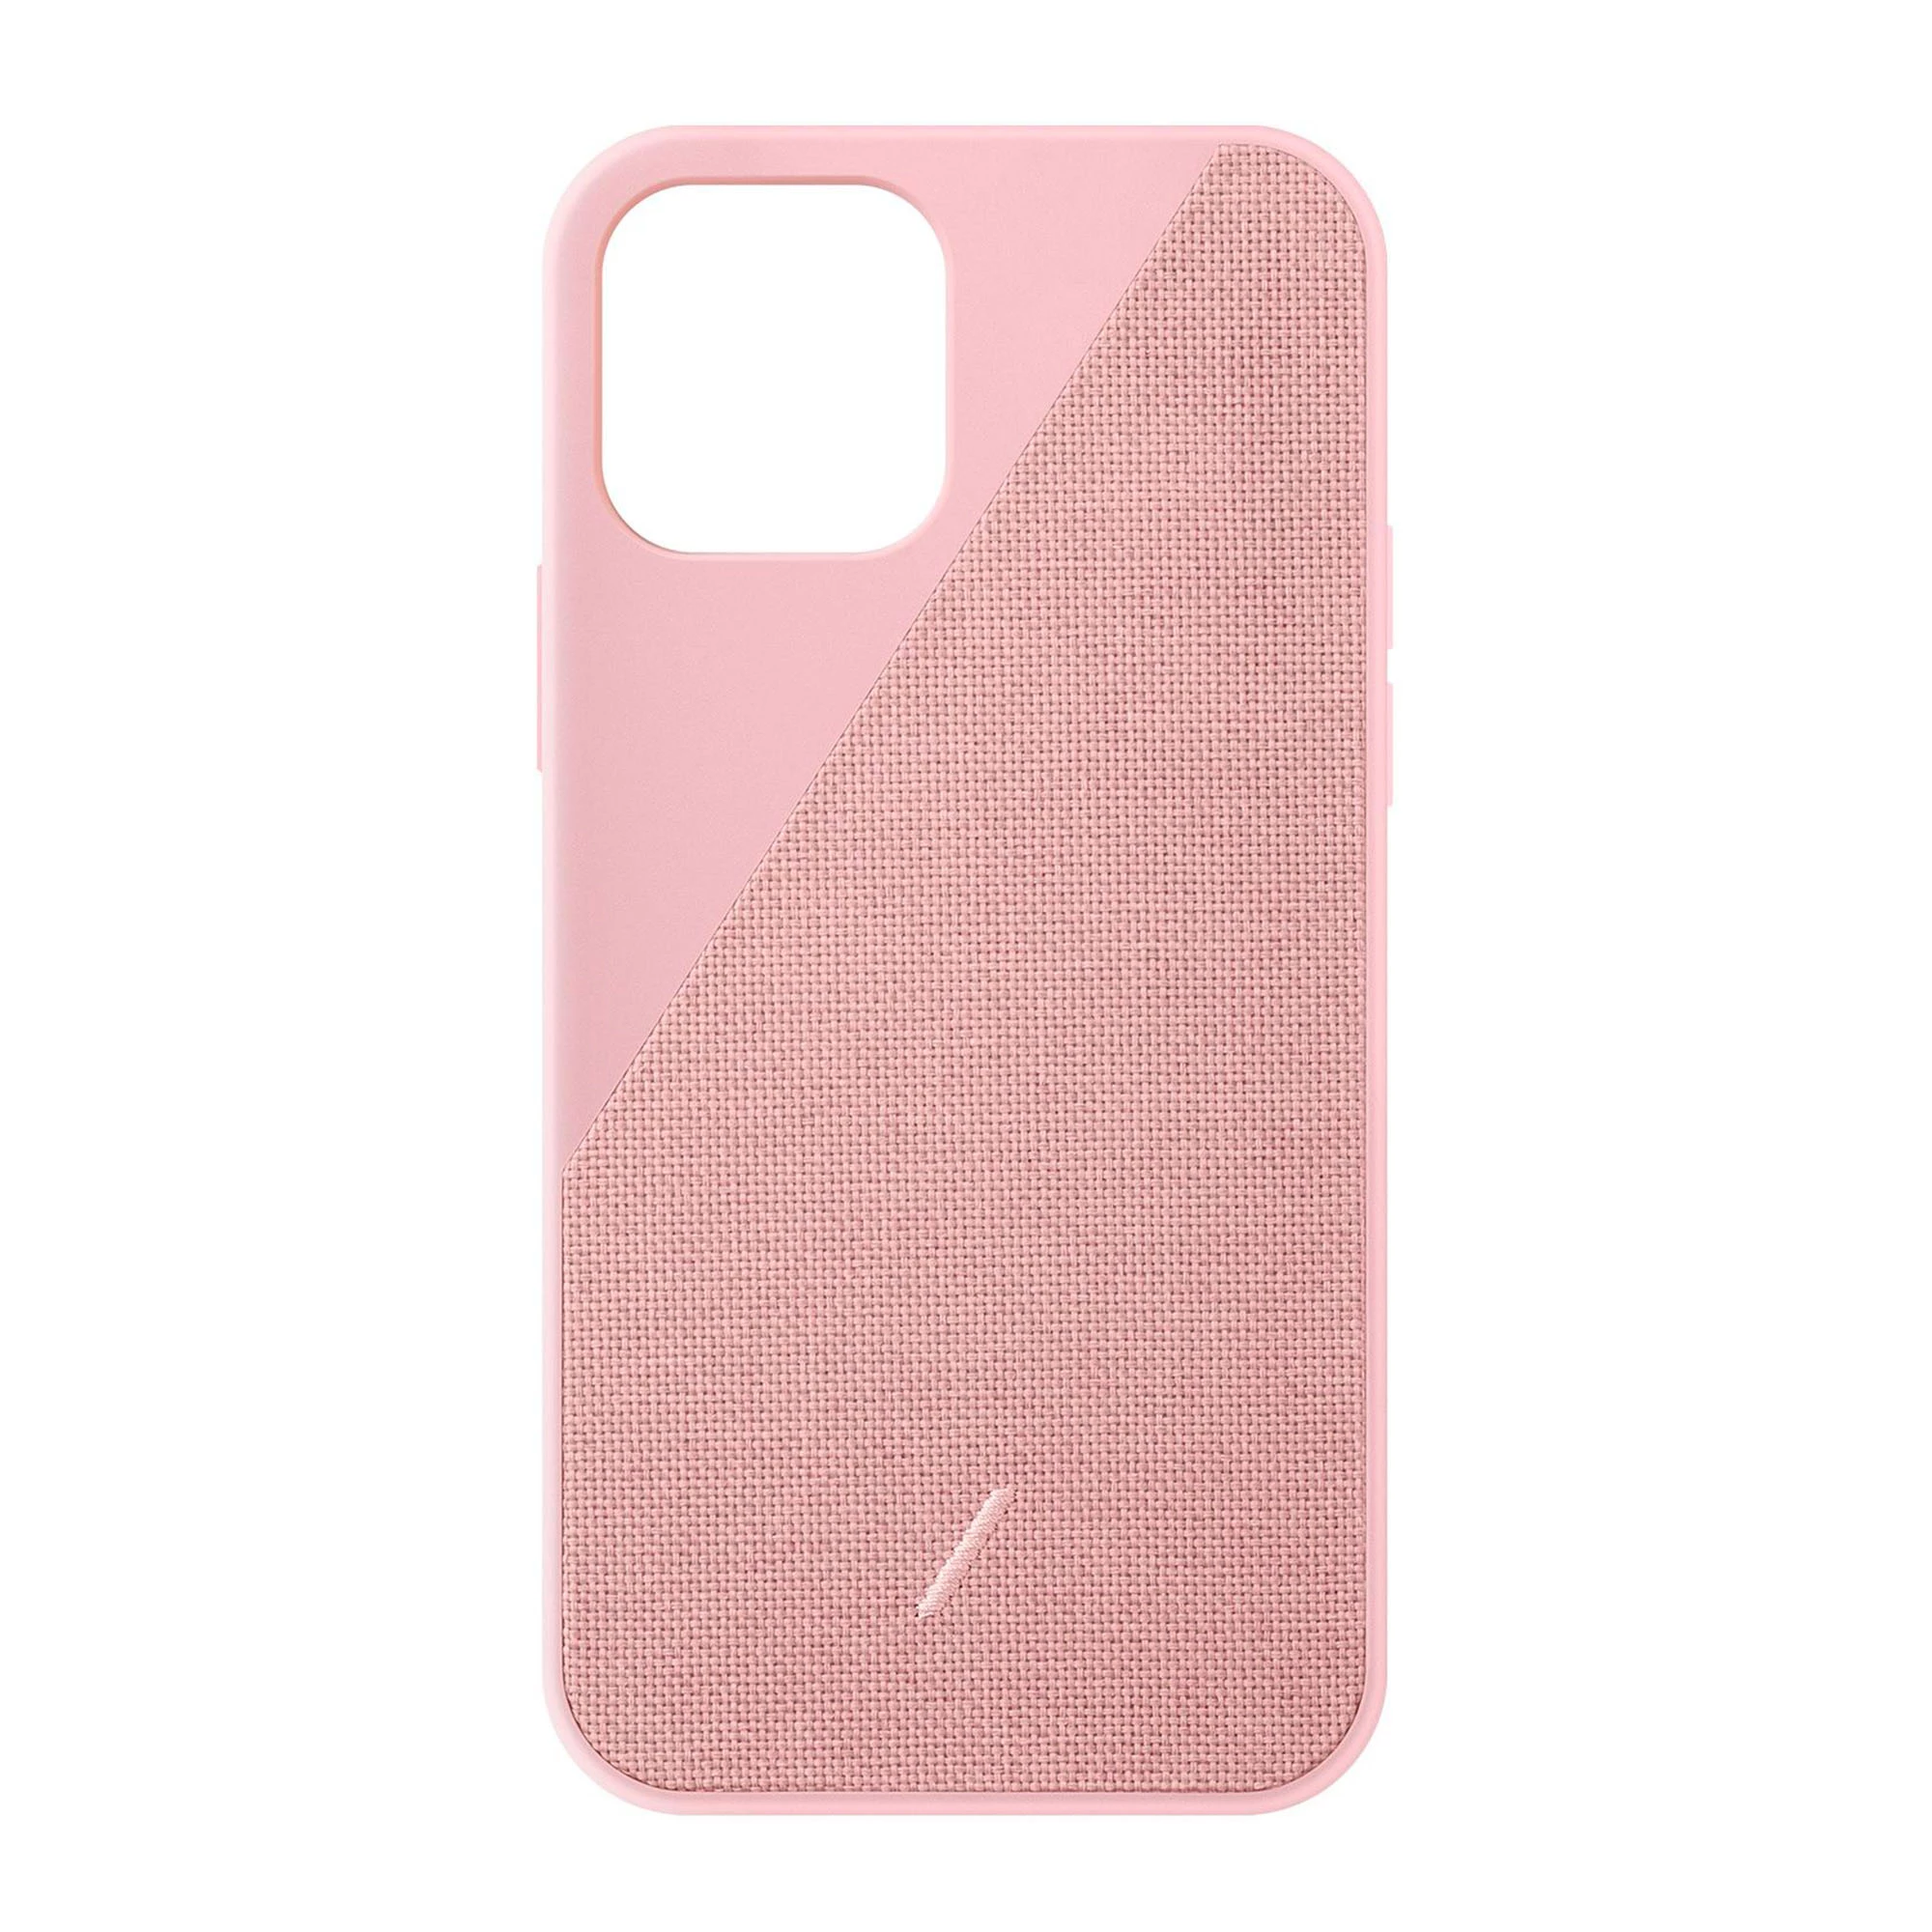 Native Union Clic Canvas Case for iPhone 12 Pro Max - Rose (CCAV-ROS-NP20L)